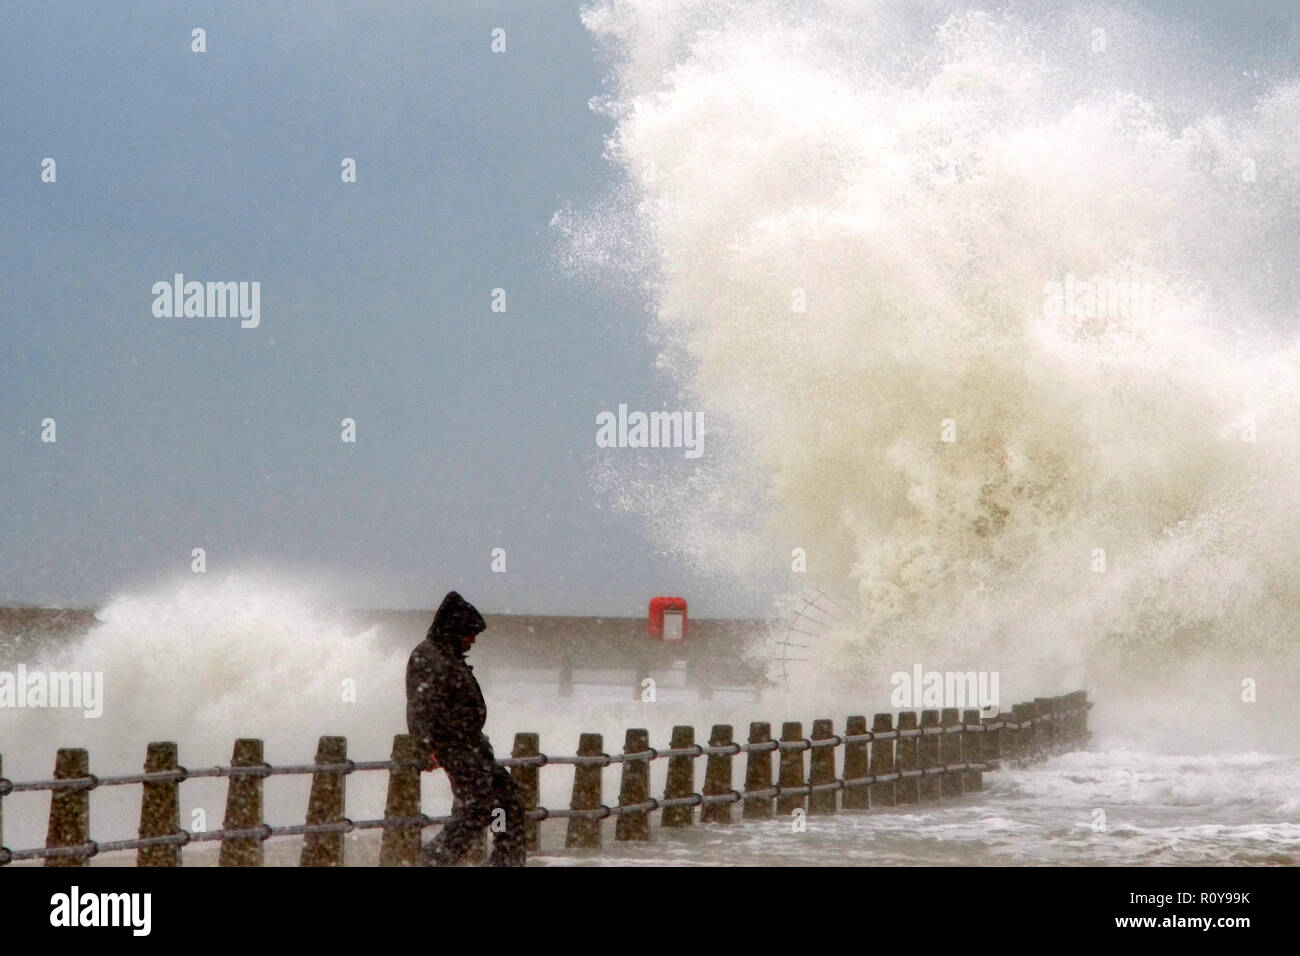 Newhaven, East Sussex. UK. 7th November 2018. A man risks his life dodging huge waves in Newhaven Harbour, East Sussex, as strong winds whip up the seas at high tide. © Peter Cripps/Alamy Live News Stock Photo